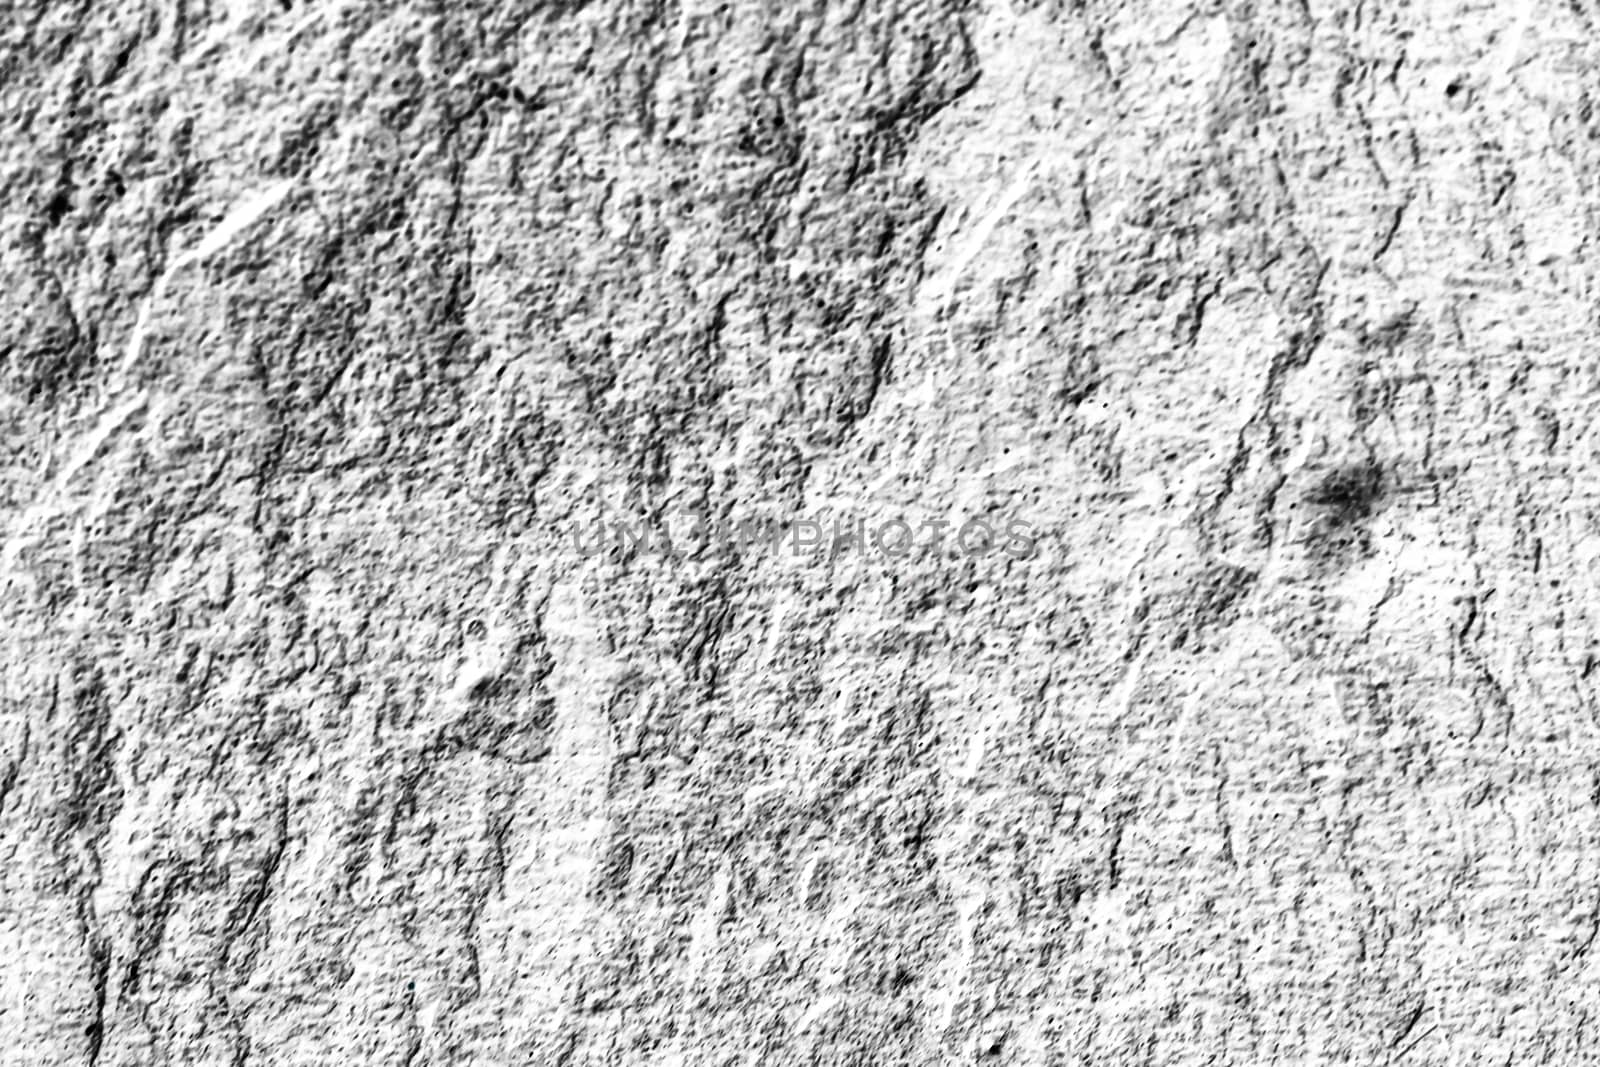 Light stone texture as abstract background, design material and textured surfaces